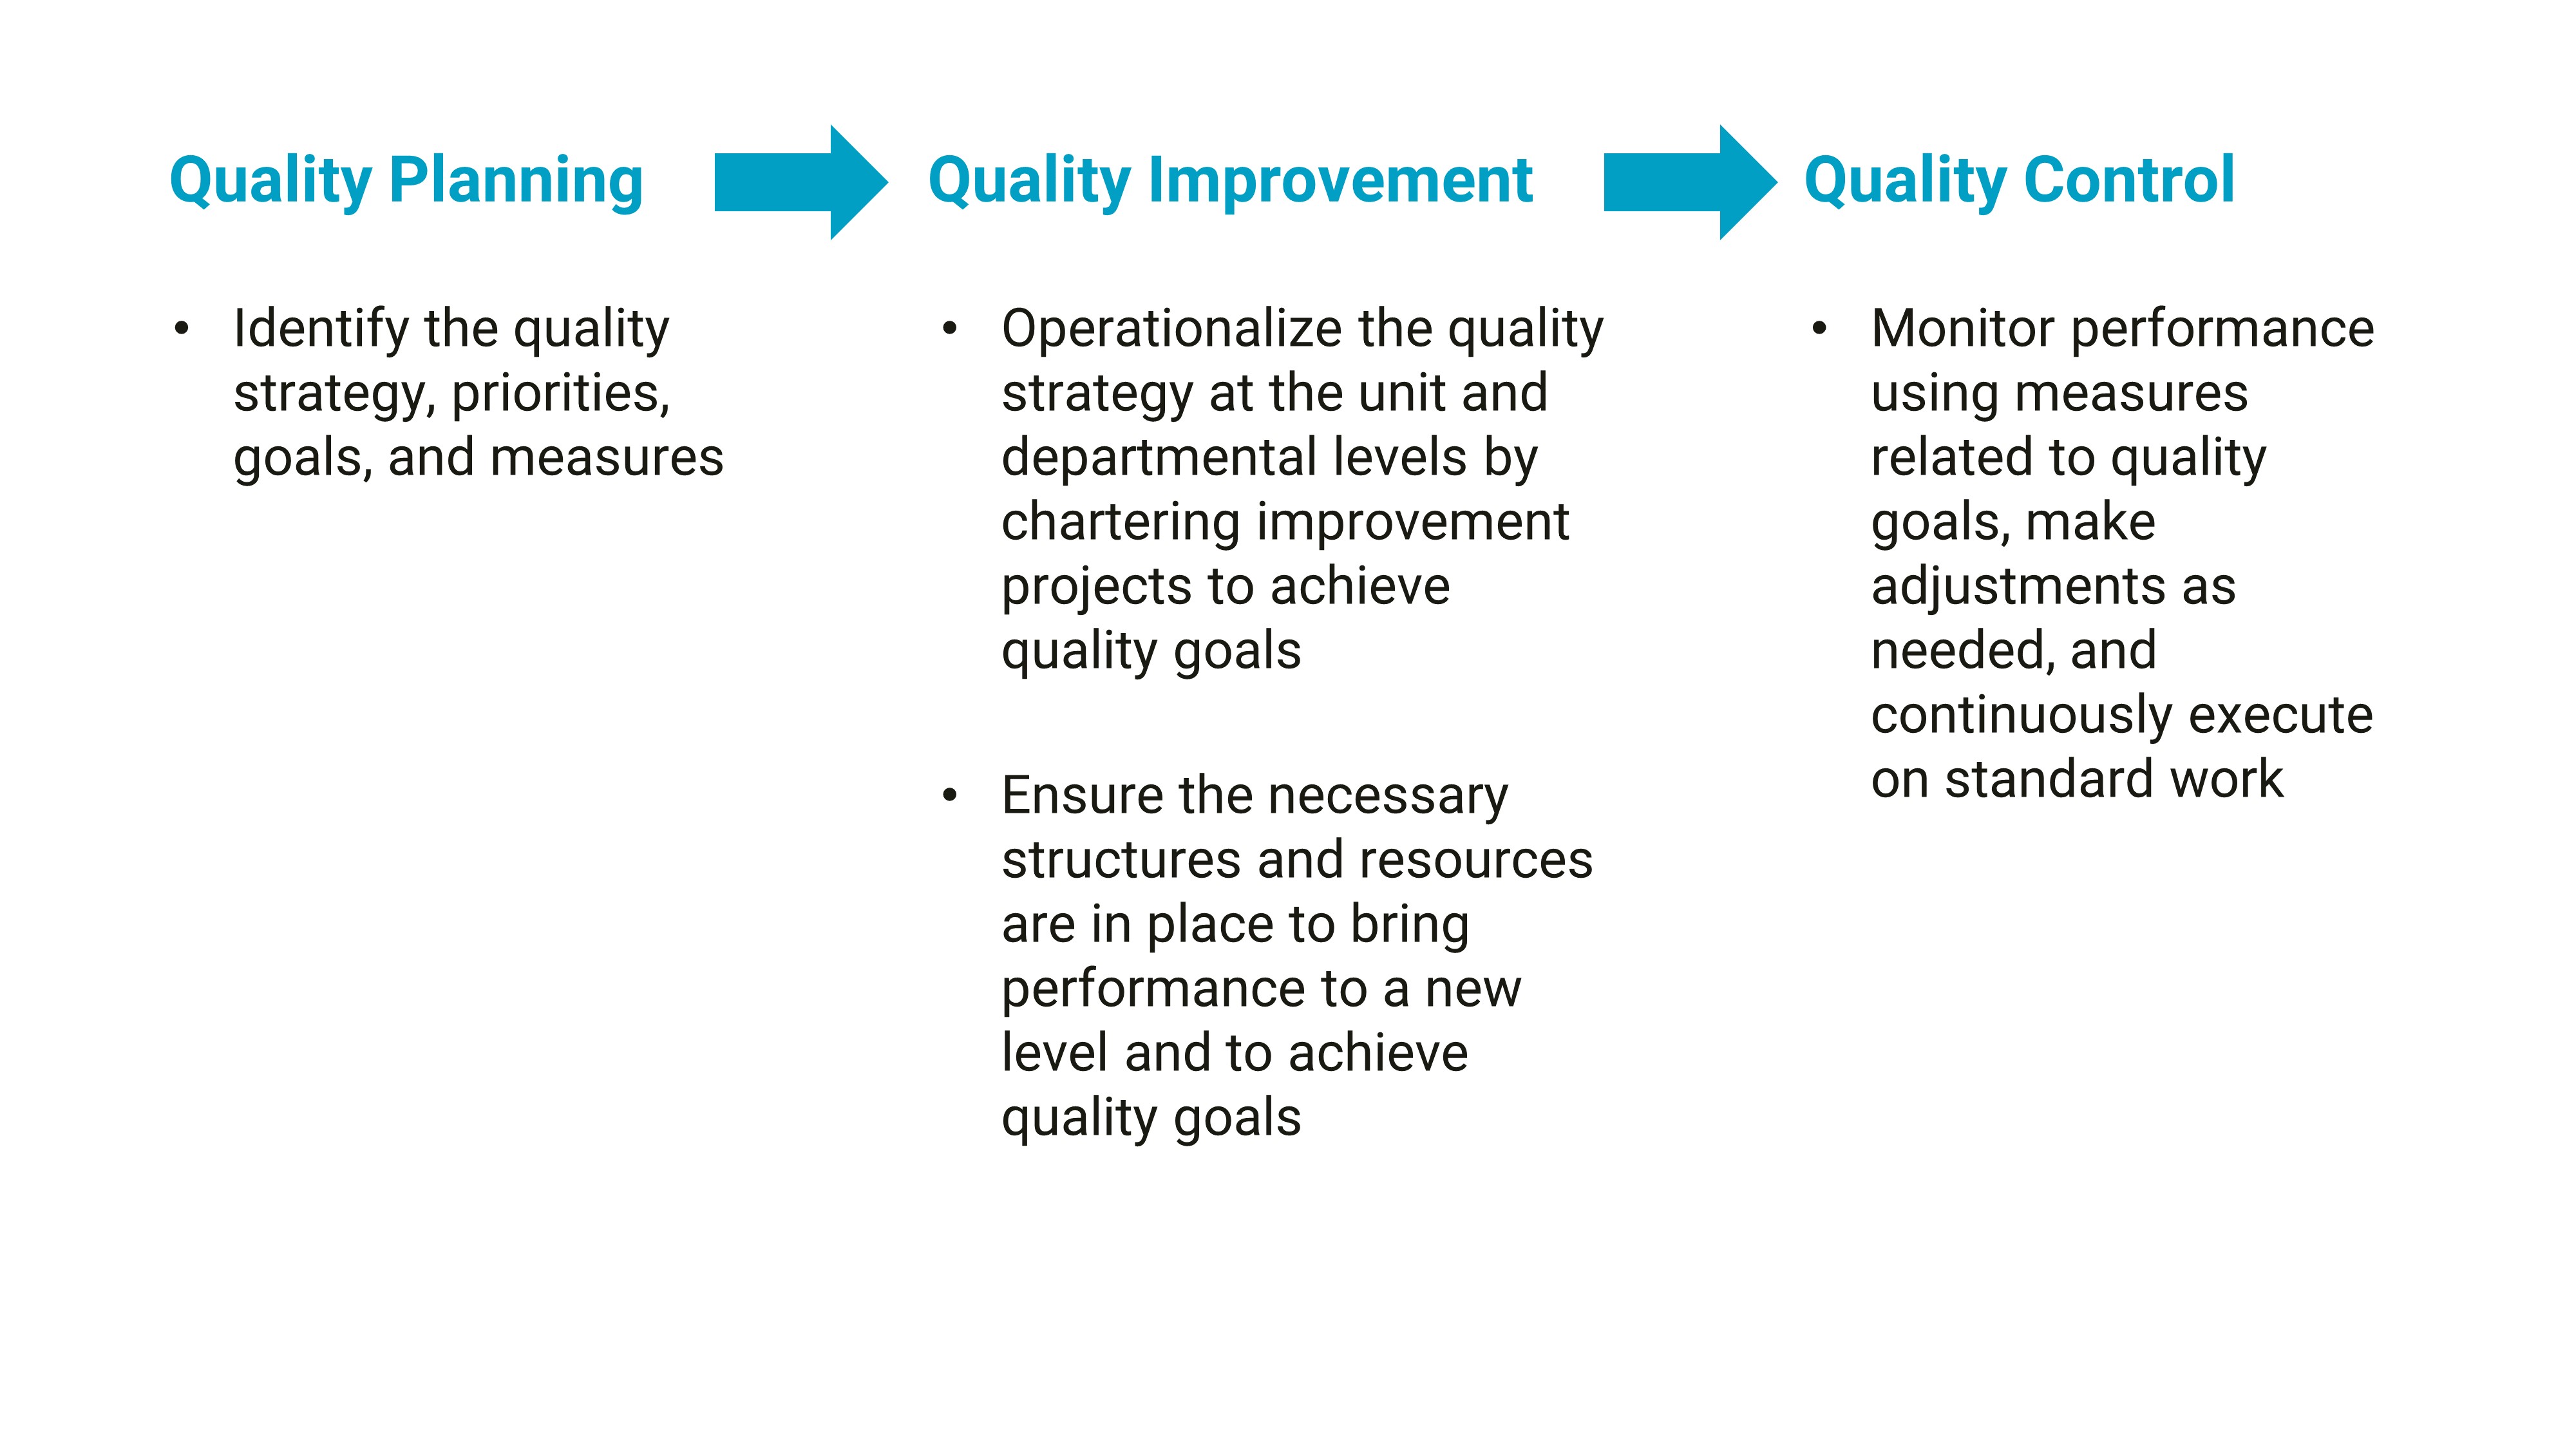 Relationship Between Quality Planning, Quality Improvement, and Quality Control